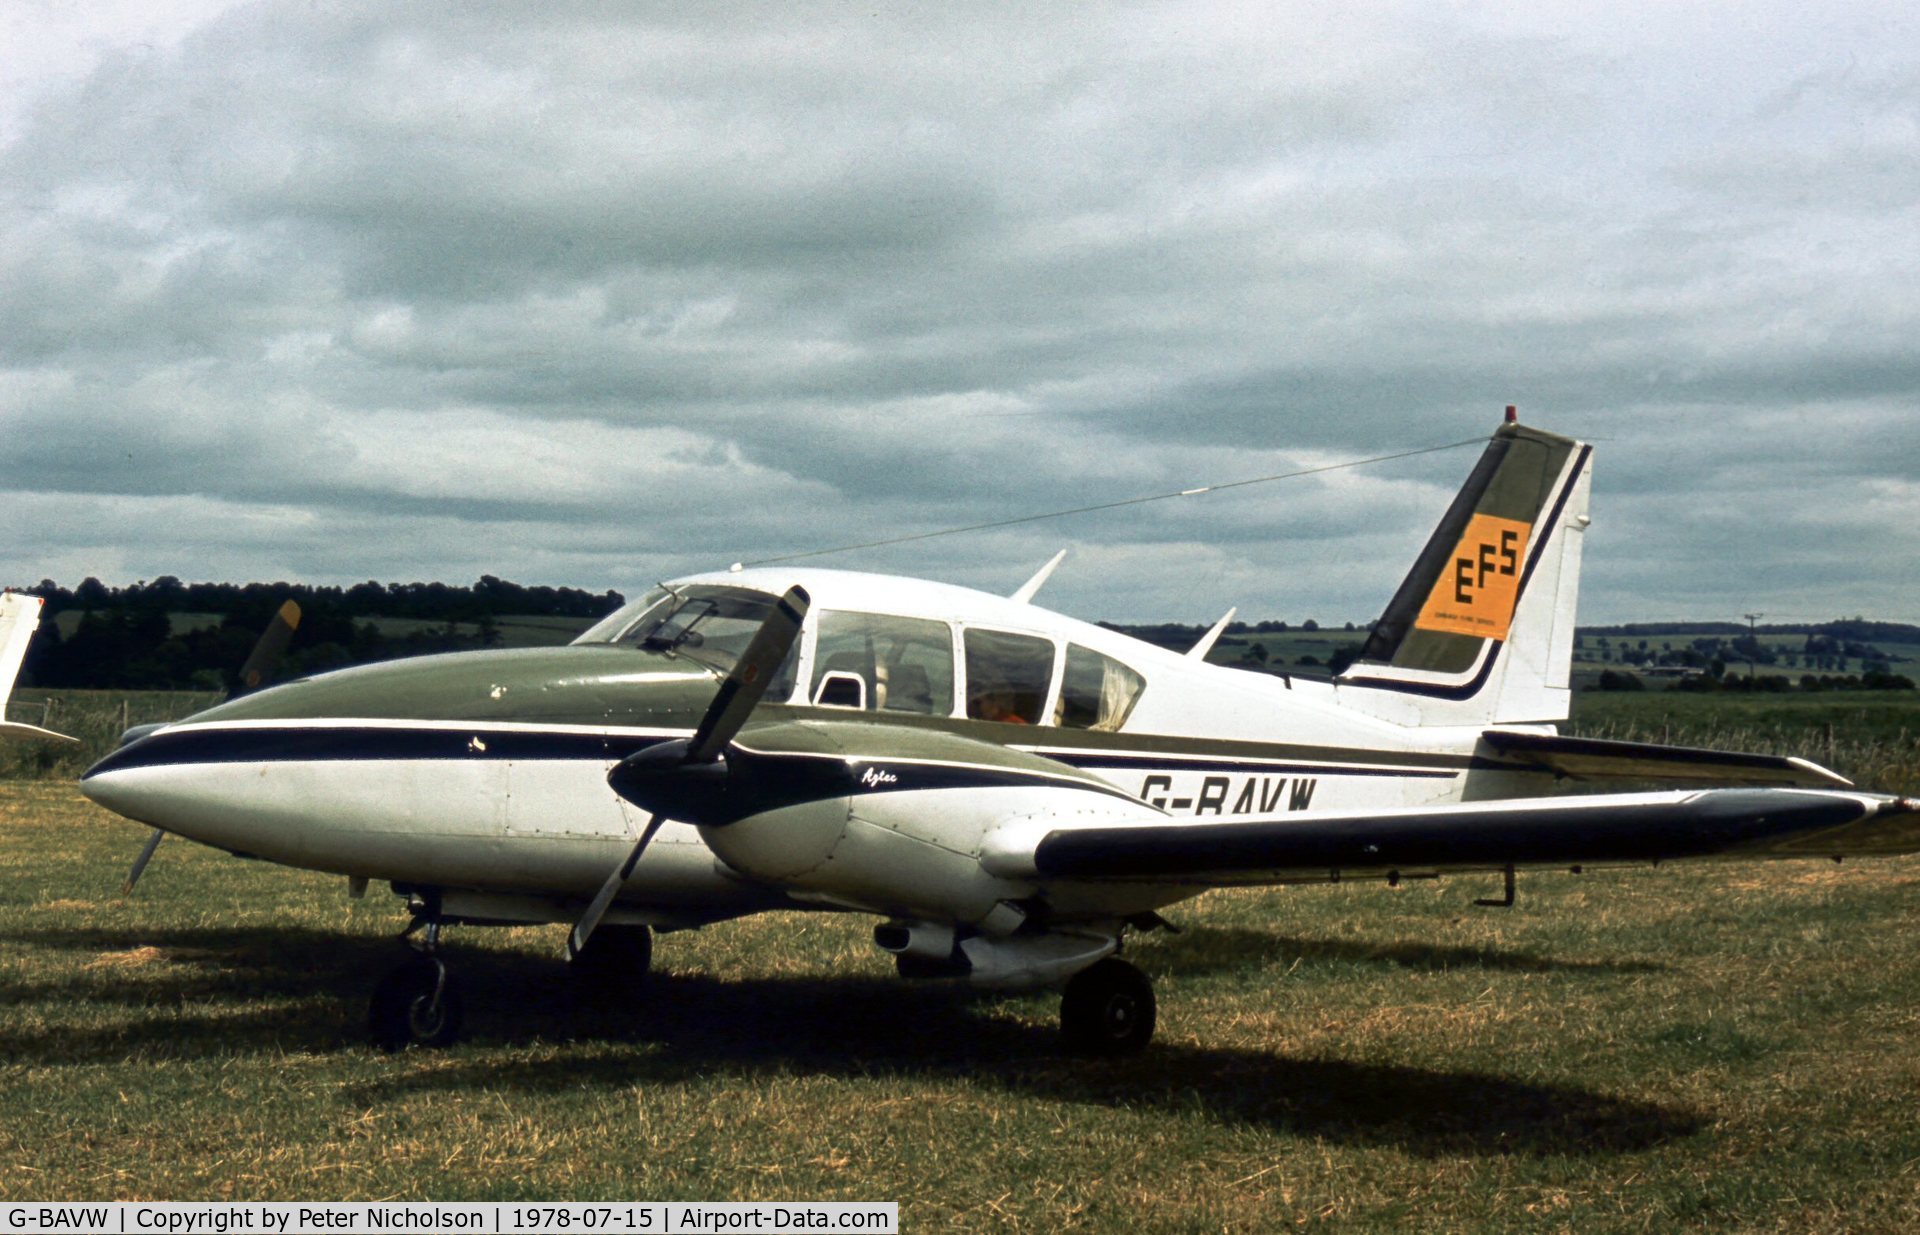 G-BAVW, 1972 Piper PA-E23-250 Aztec C/N 27-4797, This Aztec was a visitor to the 1978 Strathallan Open Day.